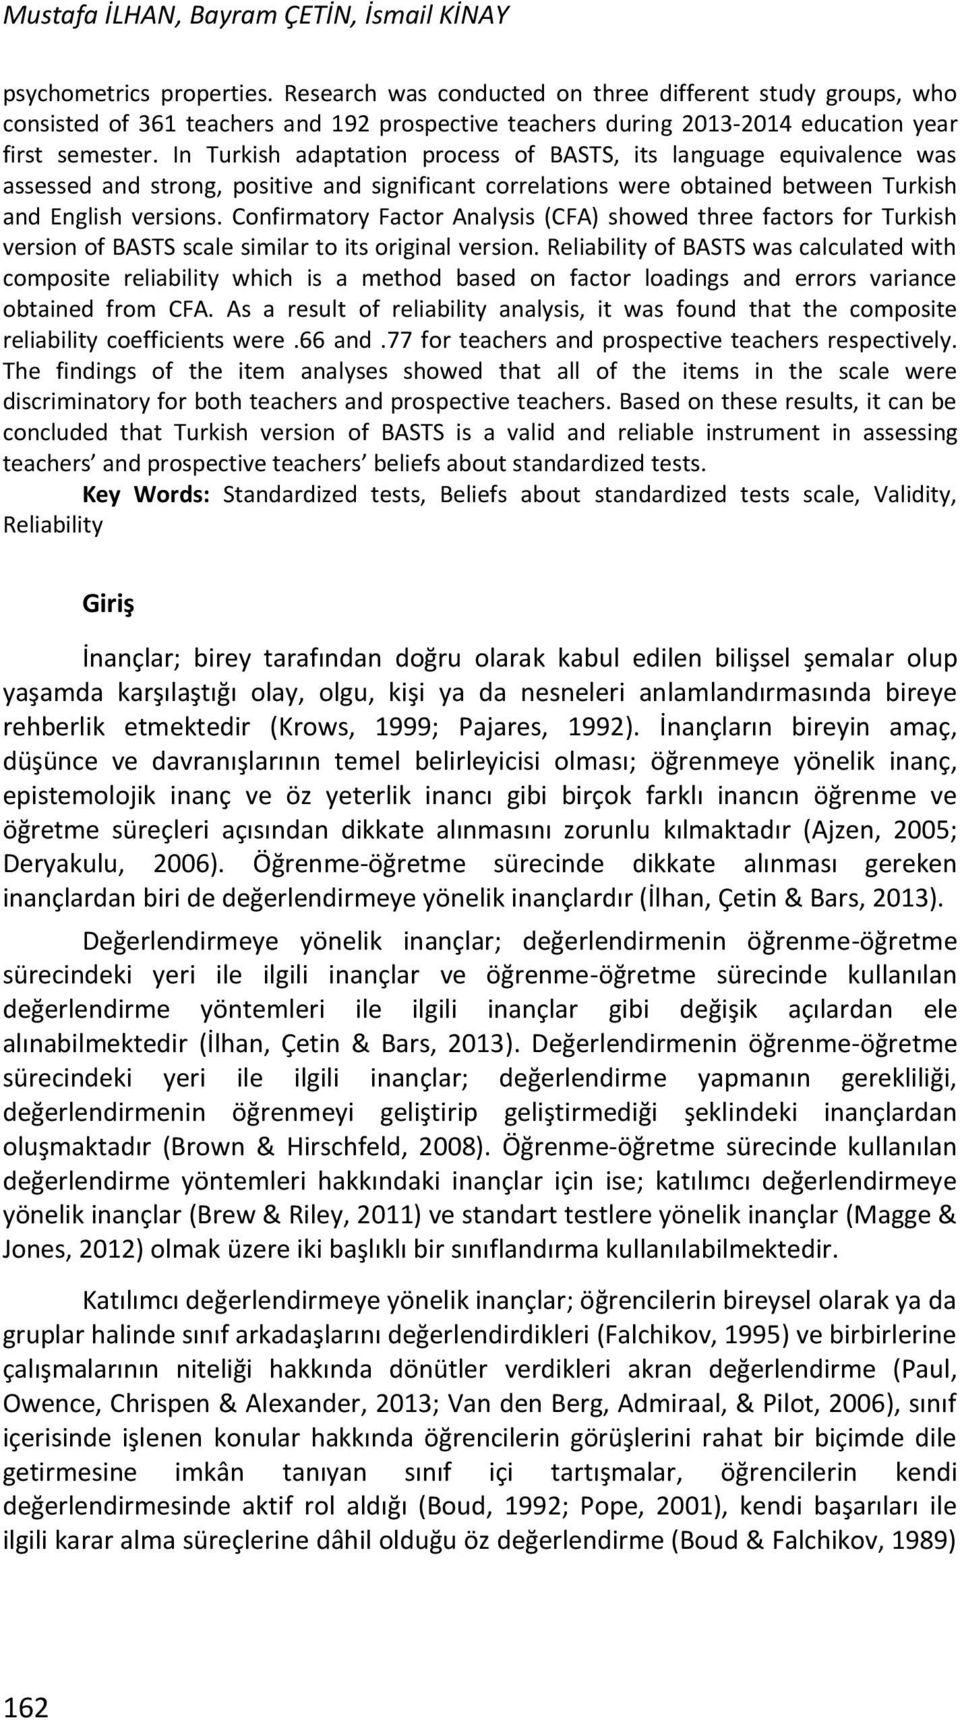 In Turkish adaptation process of BASTS, its language equivalence was assessed and strong, positive and significant correlations were obtained between Turkish and English versions.